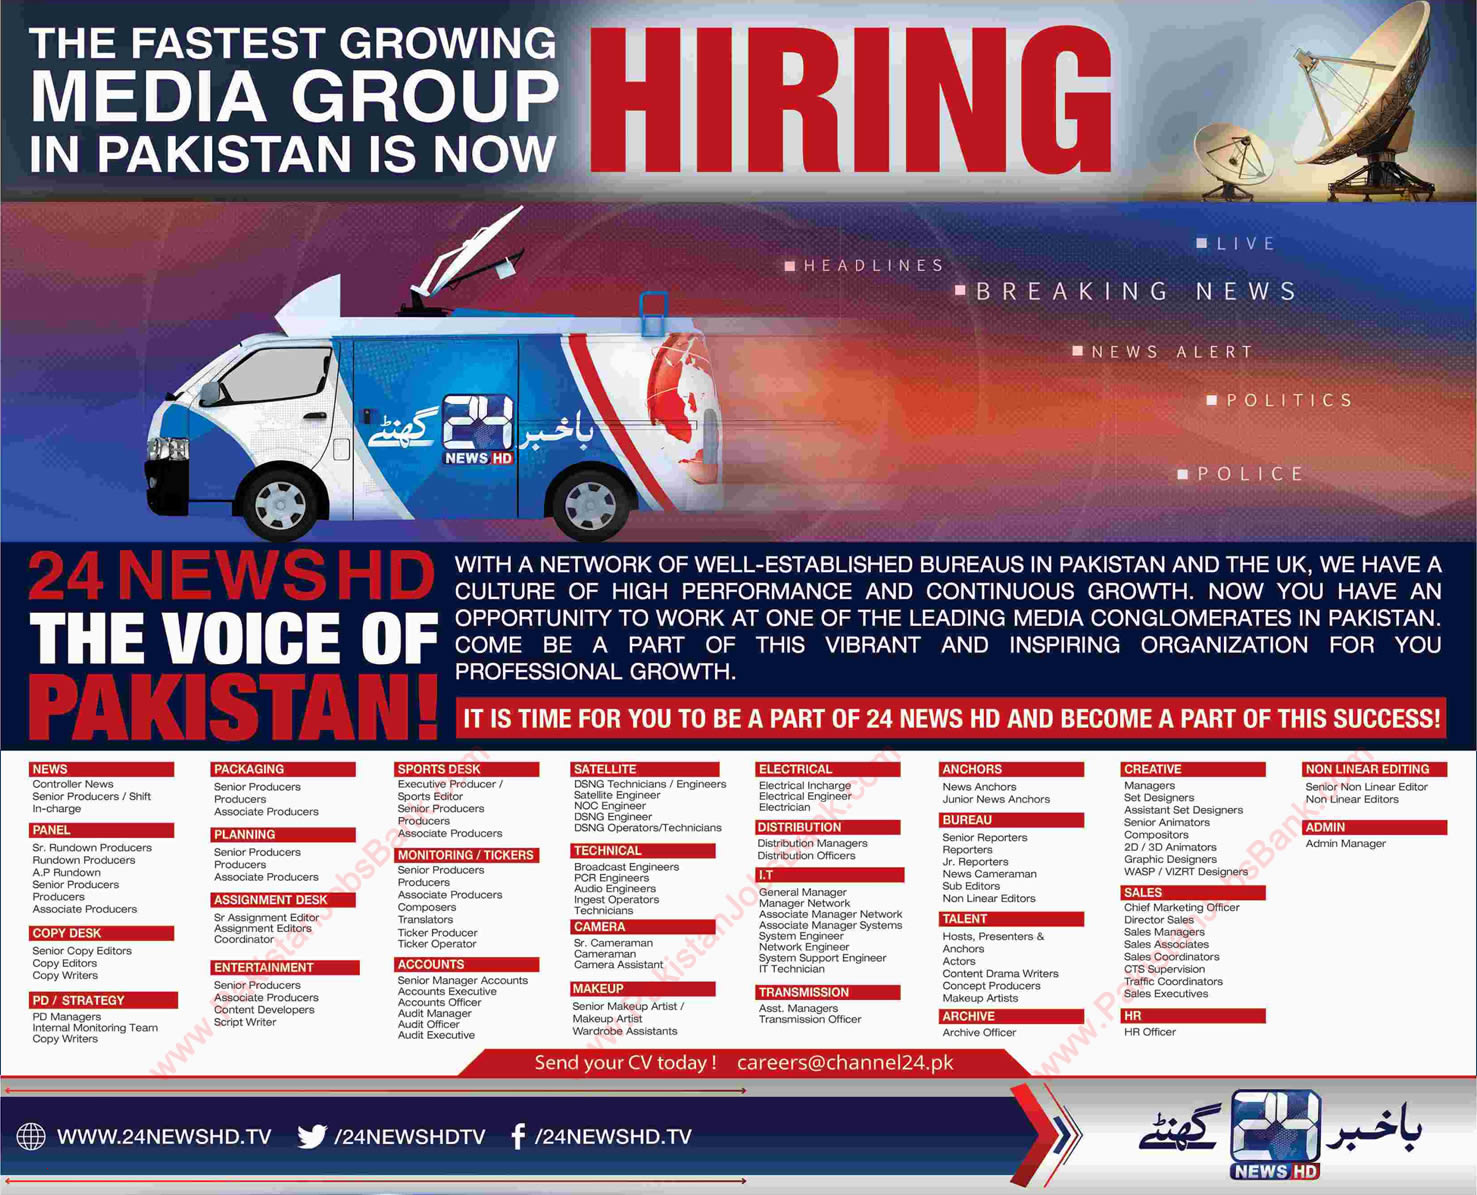 24 News Channel Jobs 2016 December 2017 Reporters, Anchors, Engineers, Editors & Others Latest